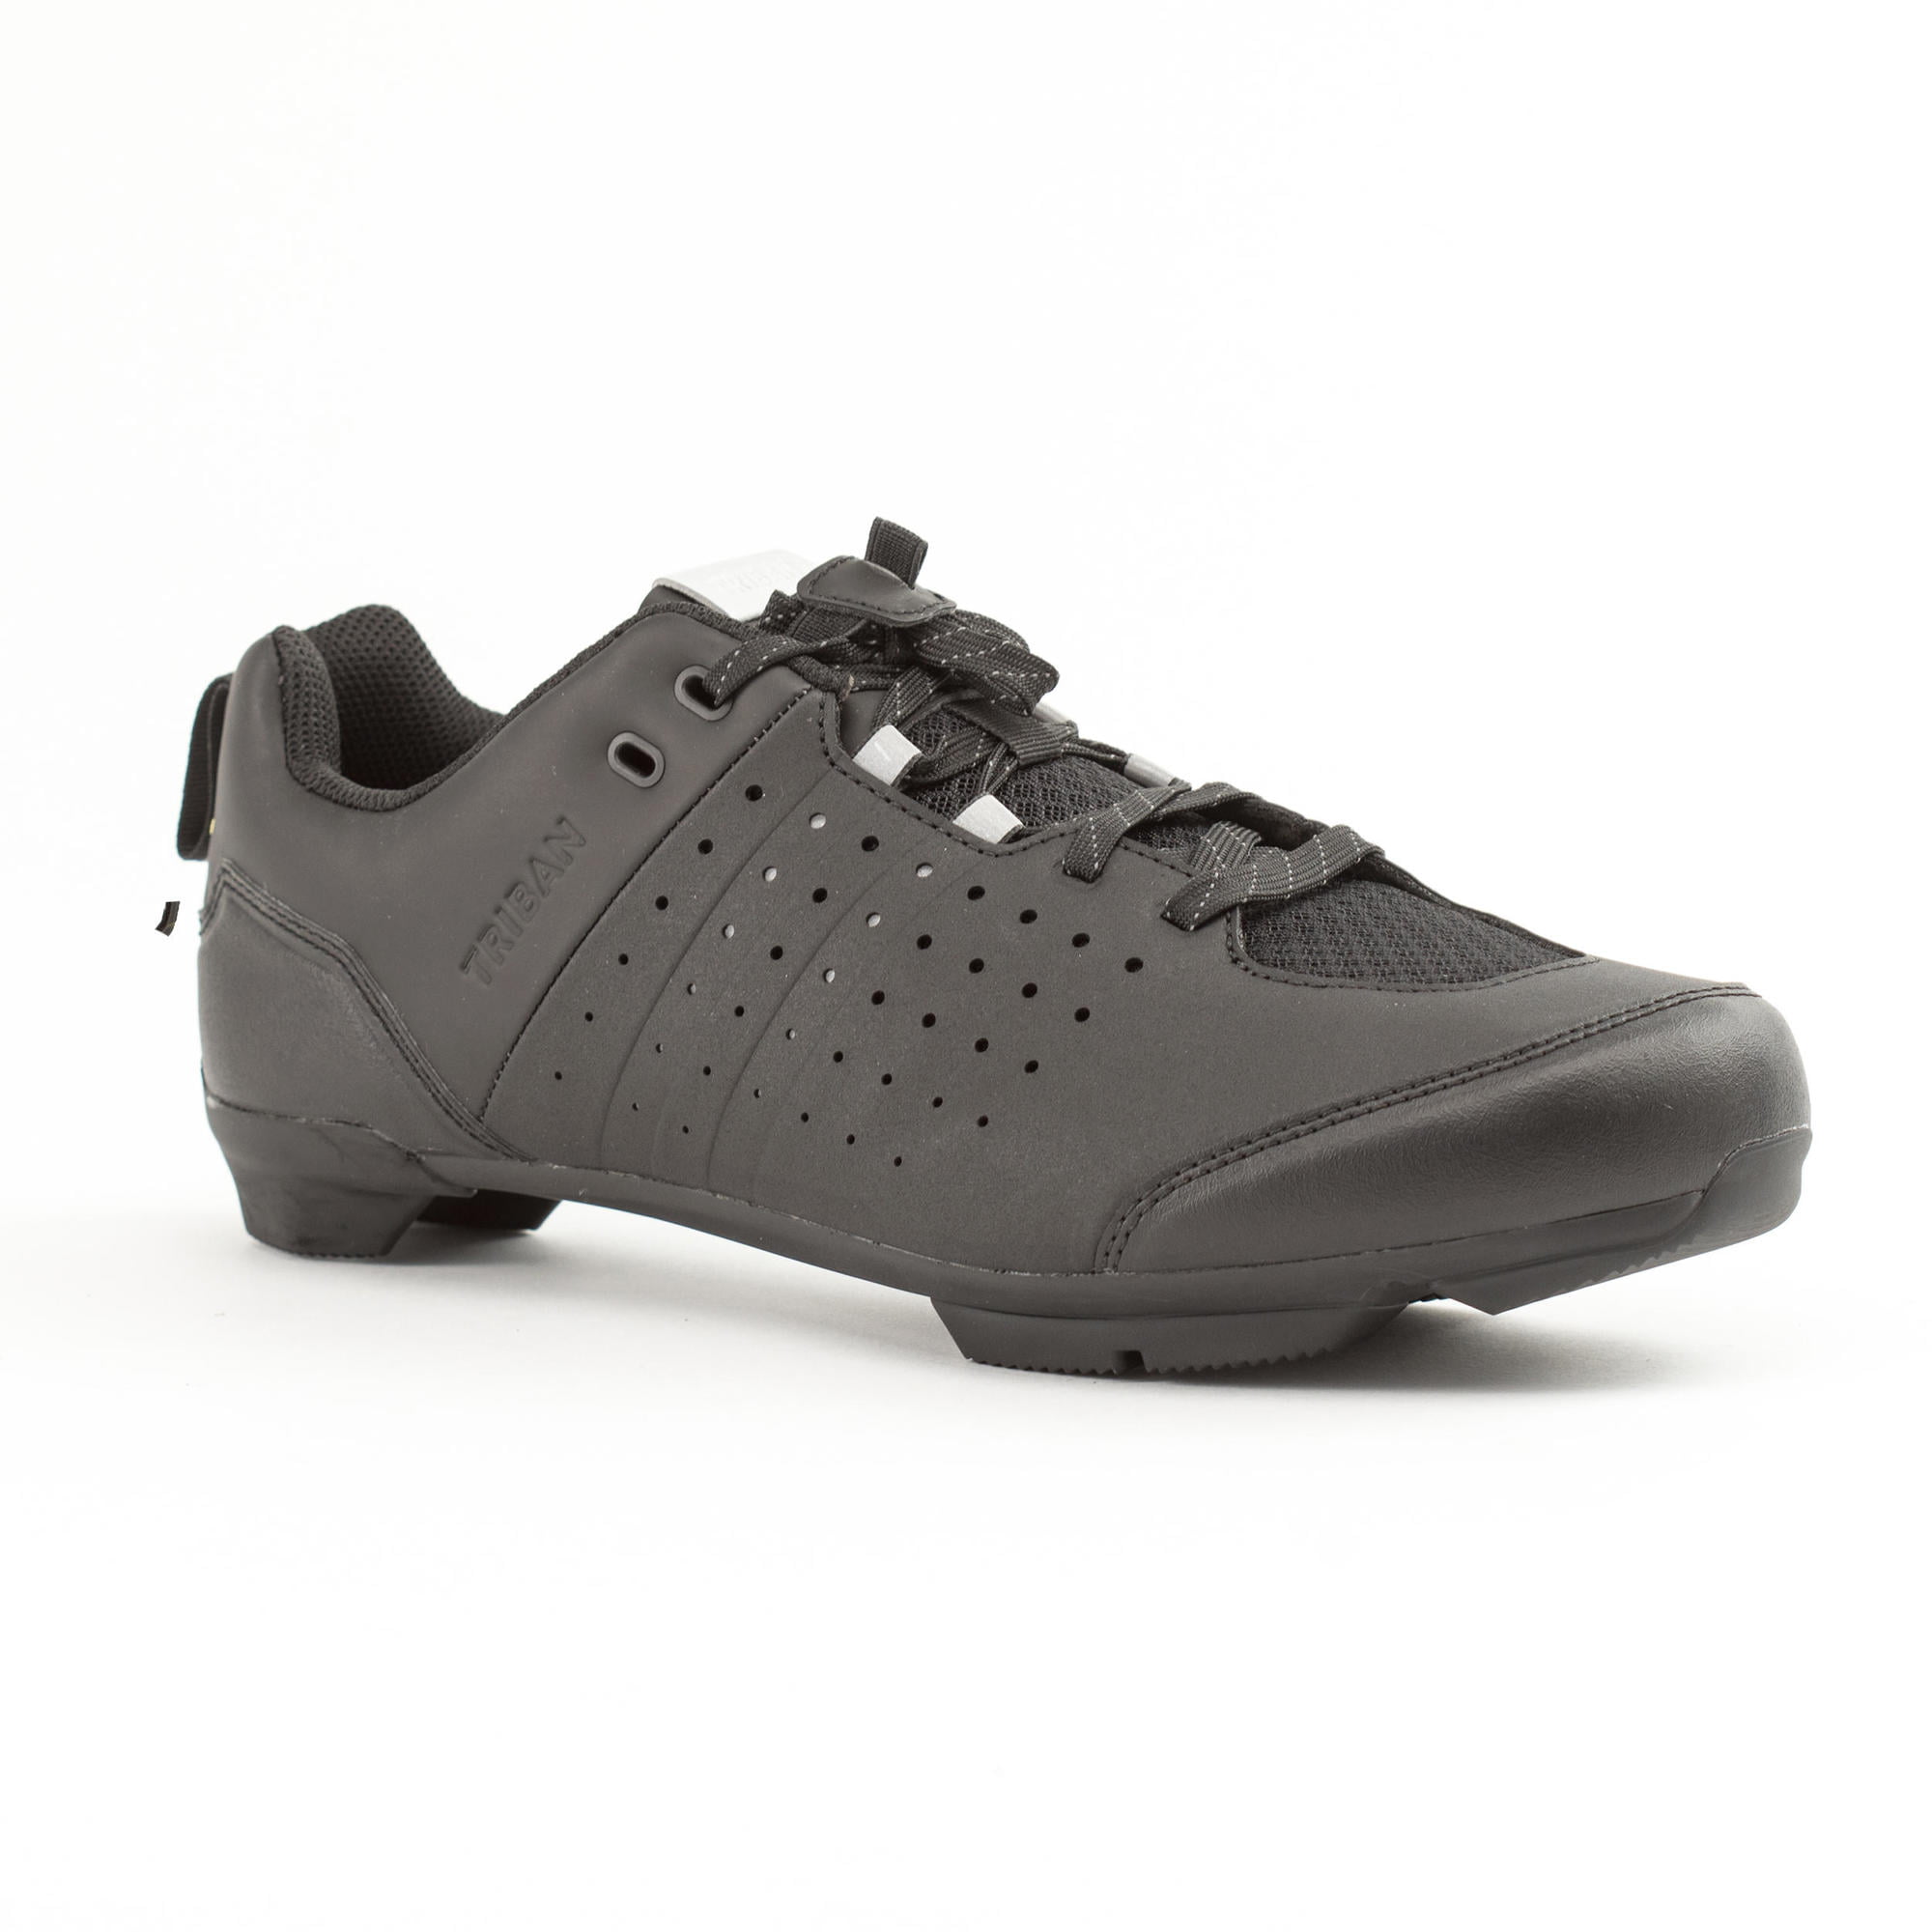 DECATHLON - SPD Road Cycling Shoes 500 